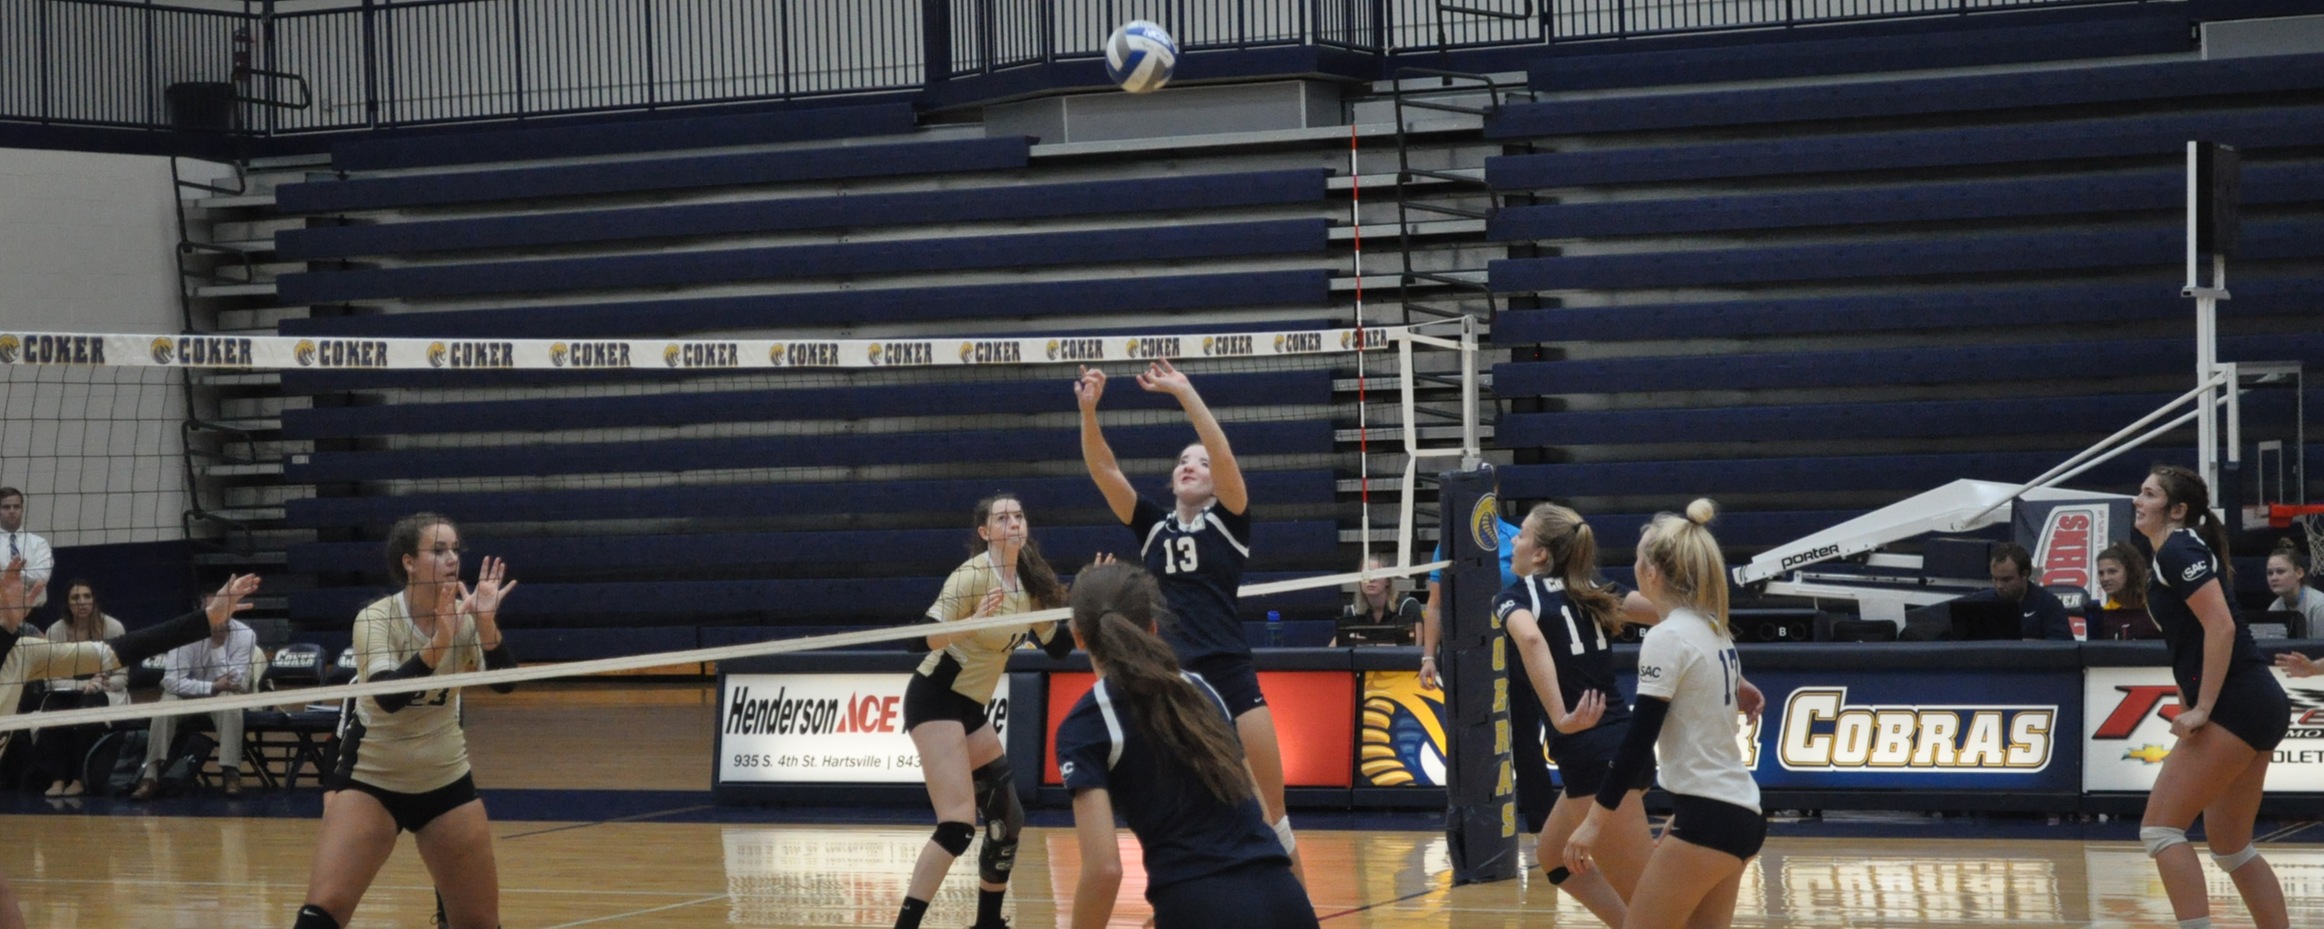 Volleyball Drops Conference Contest to Queens (N.C.) on Saturday